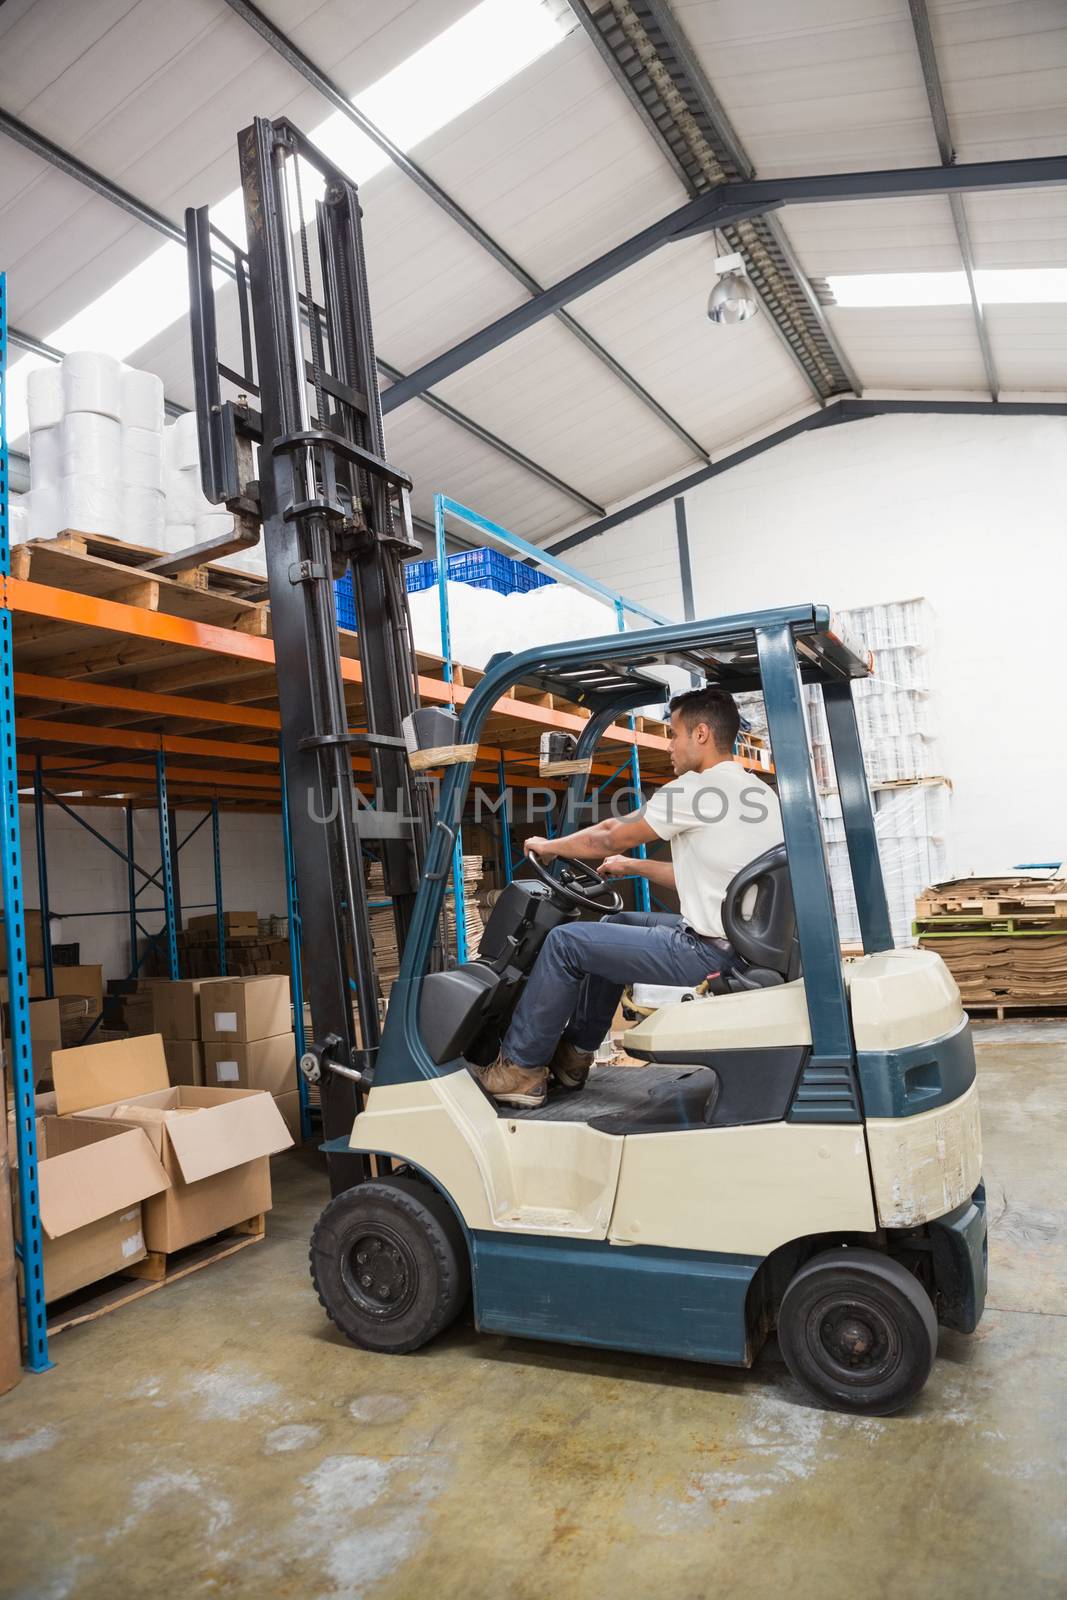 Driver operating forklift machine in a large warehouse